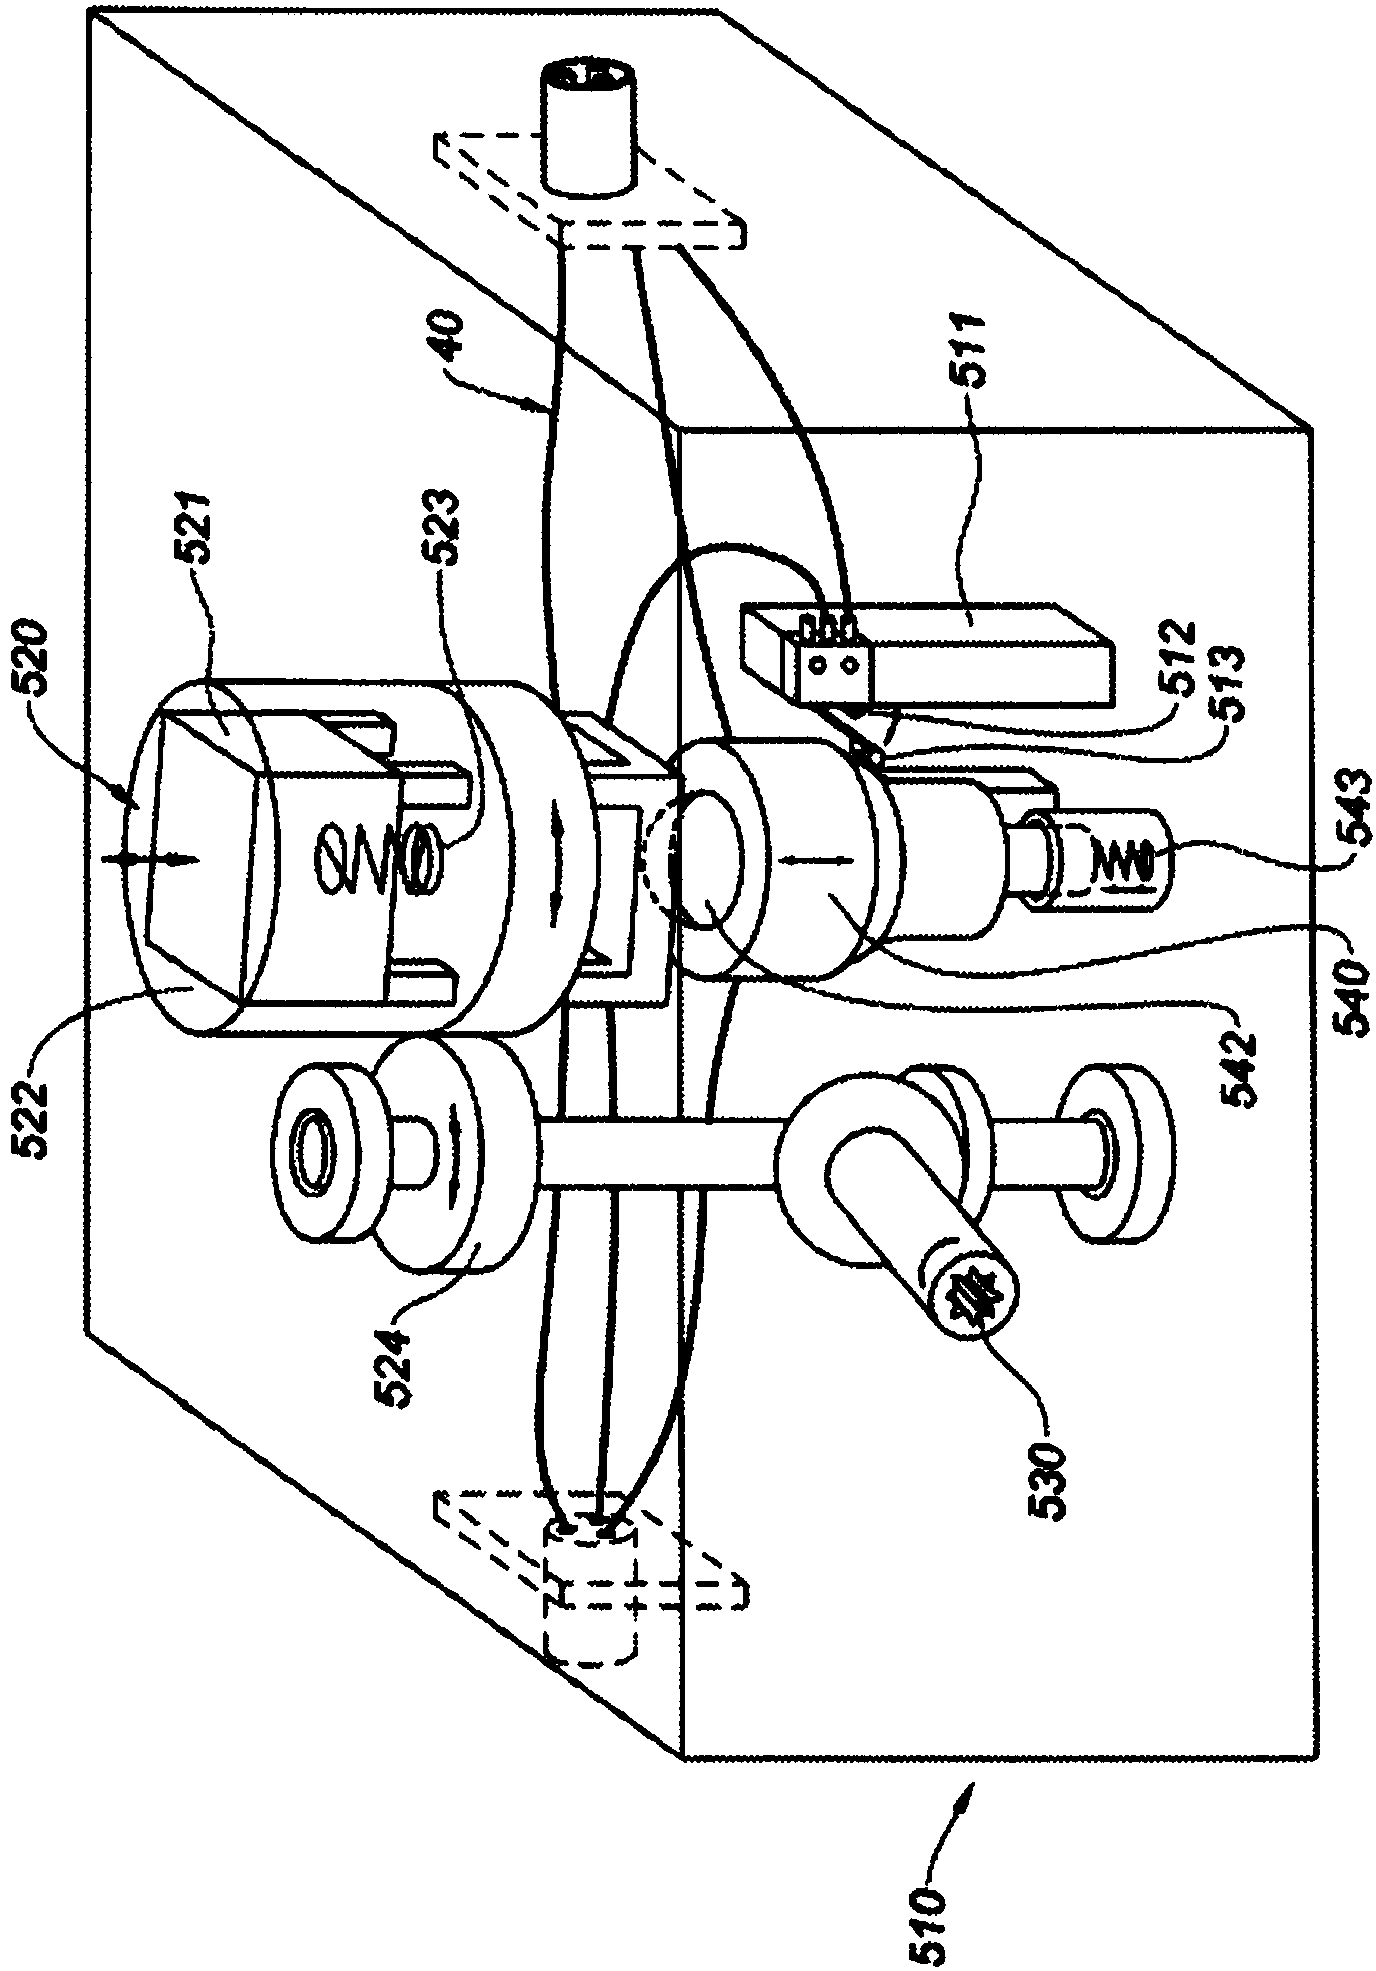 Tertiary locking assembly for a thrust reverser